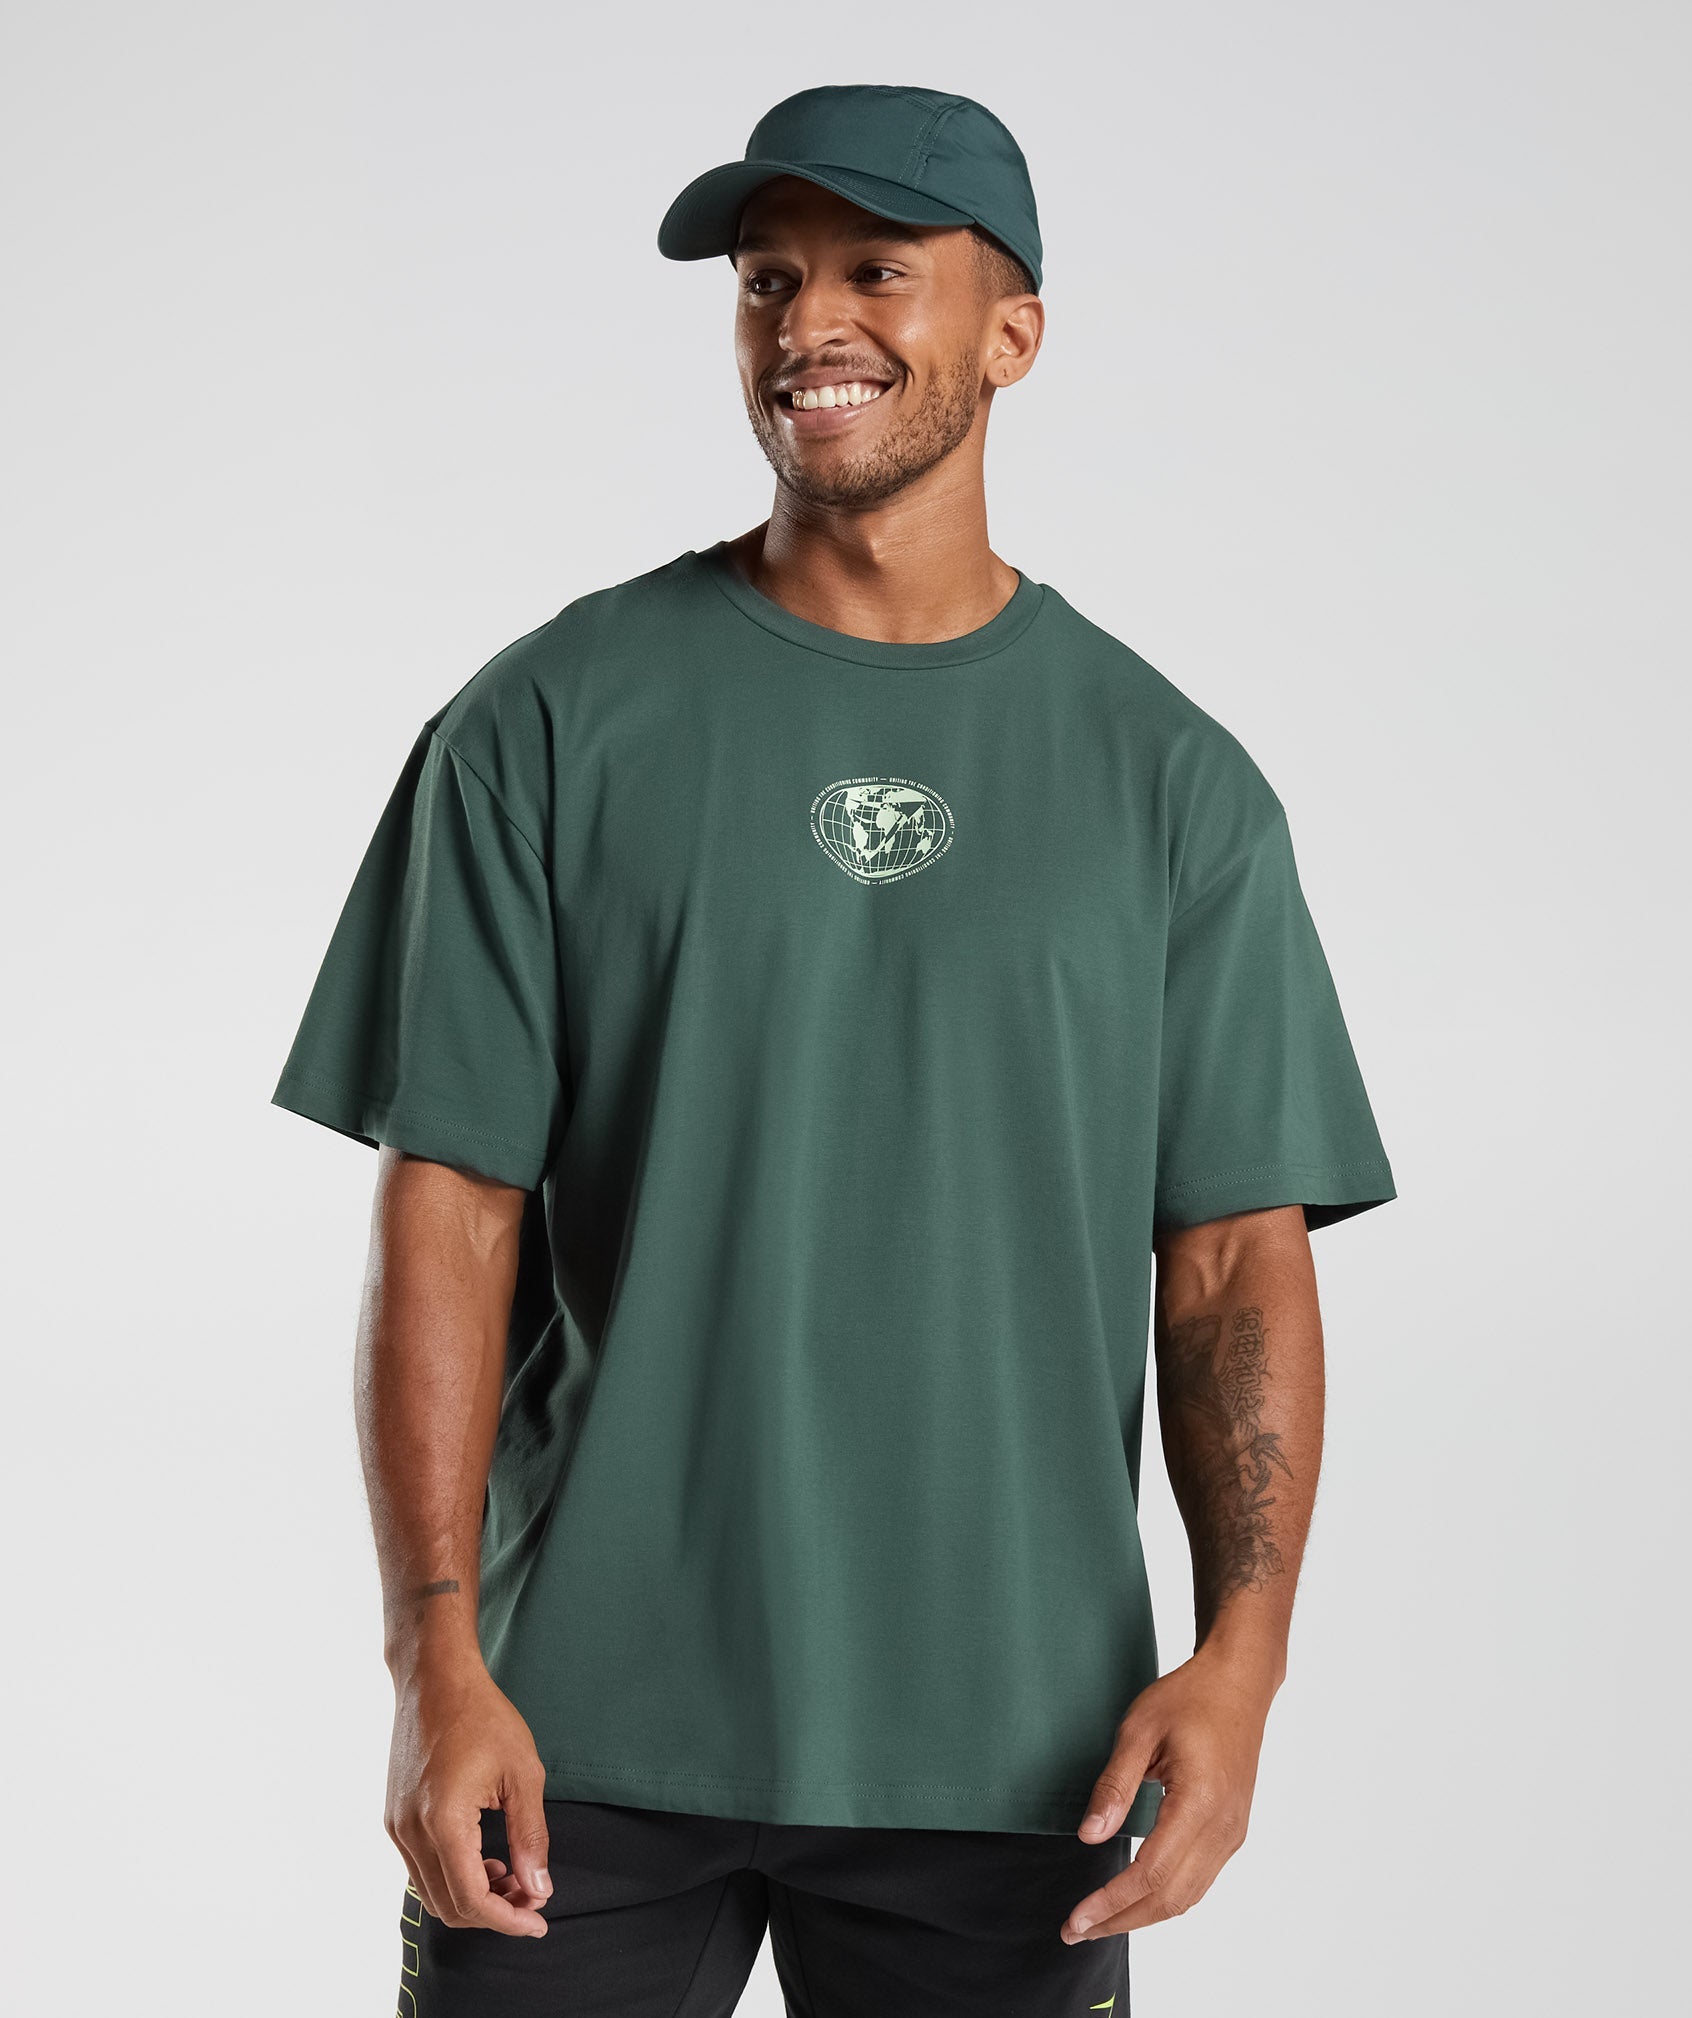 Recovery Graphic T-Shirt in Obsidian Green - view 2